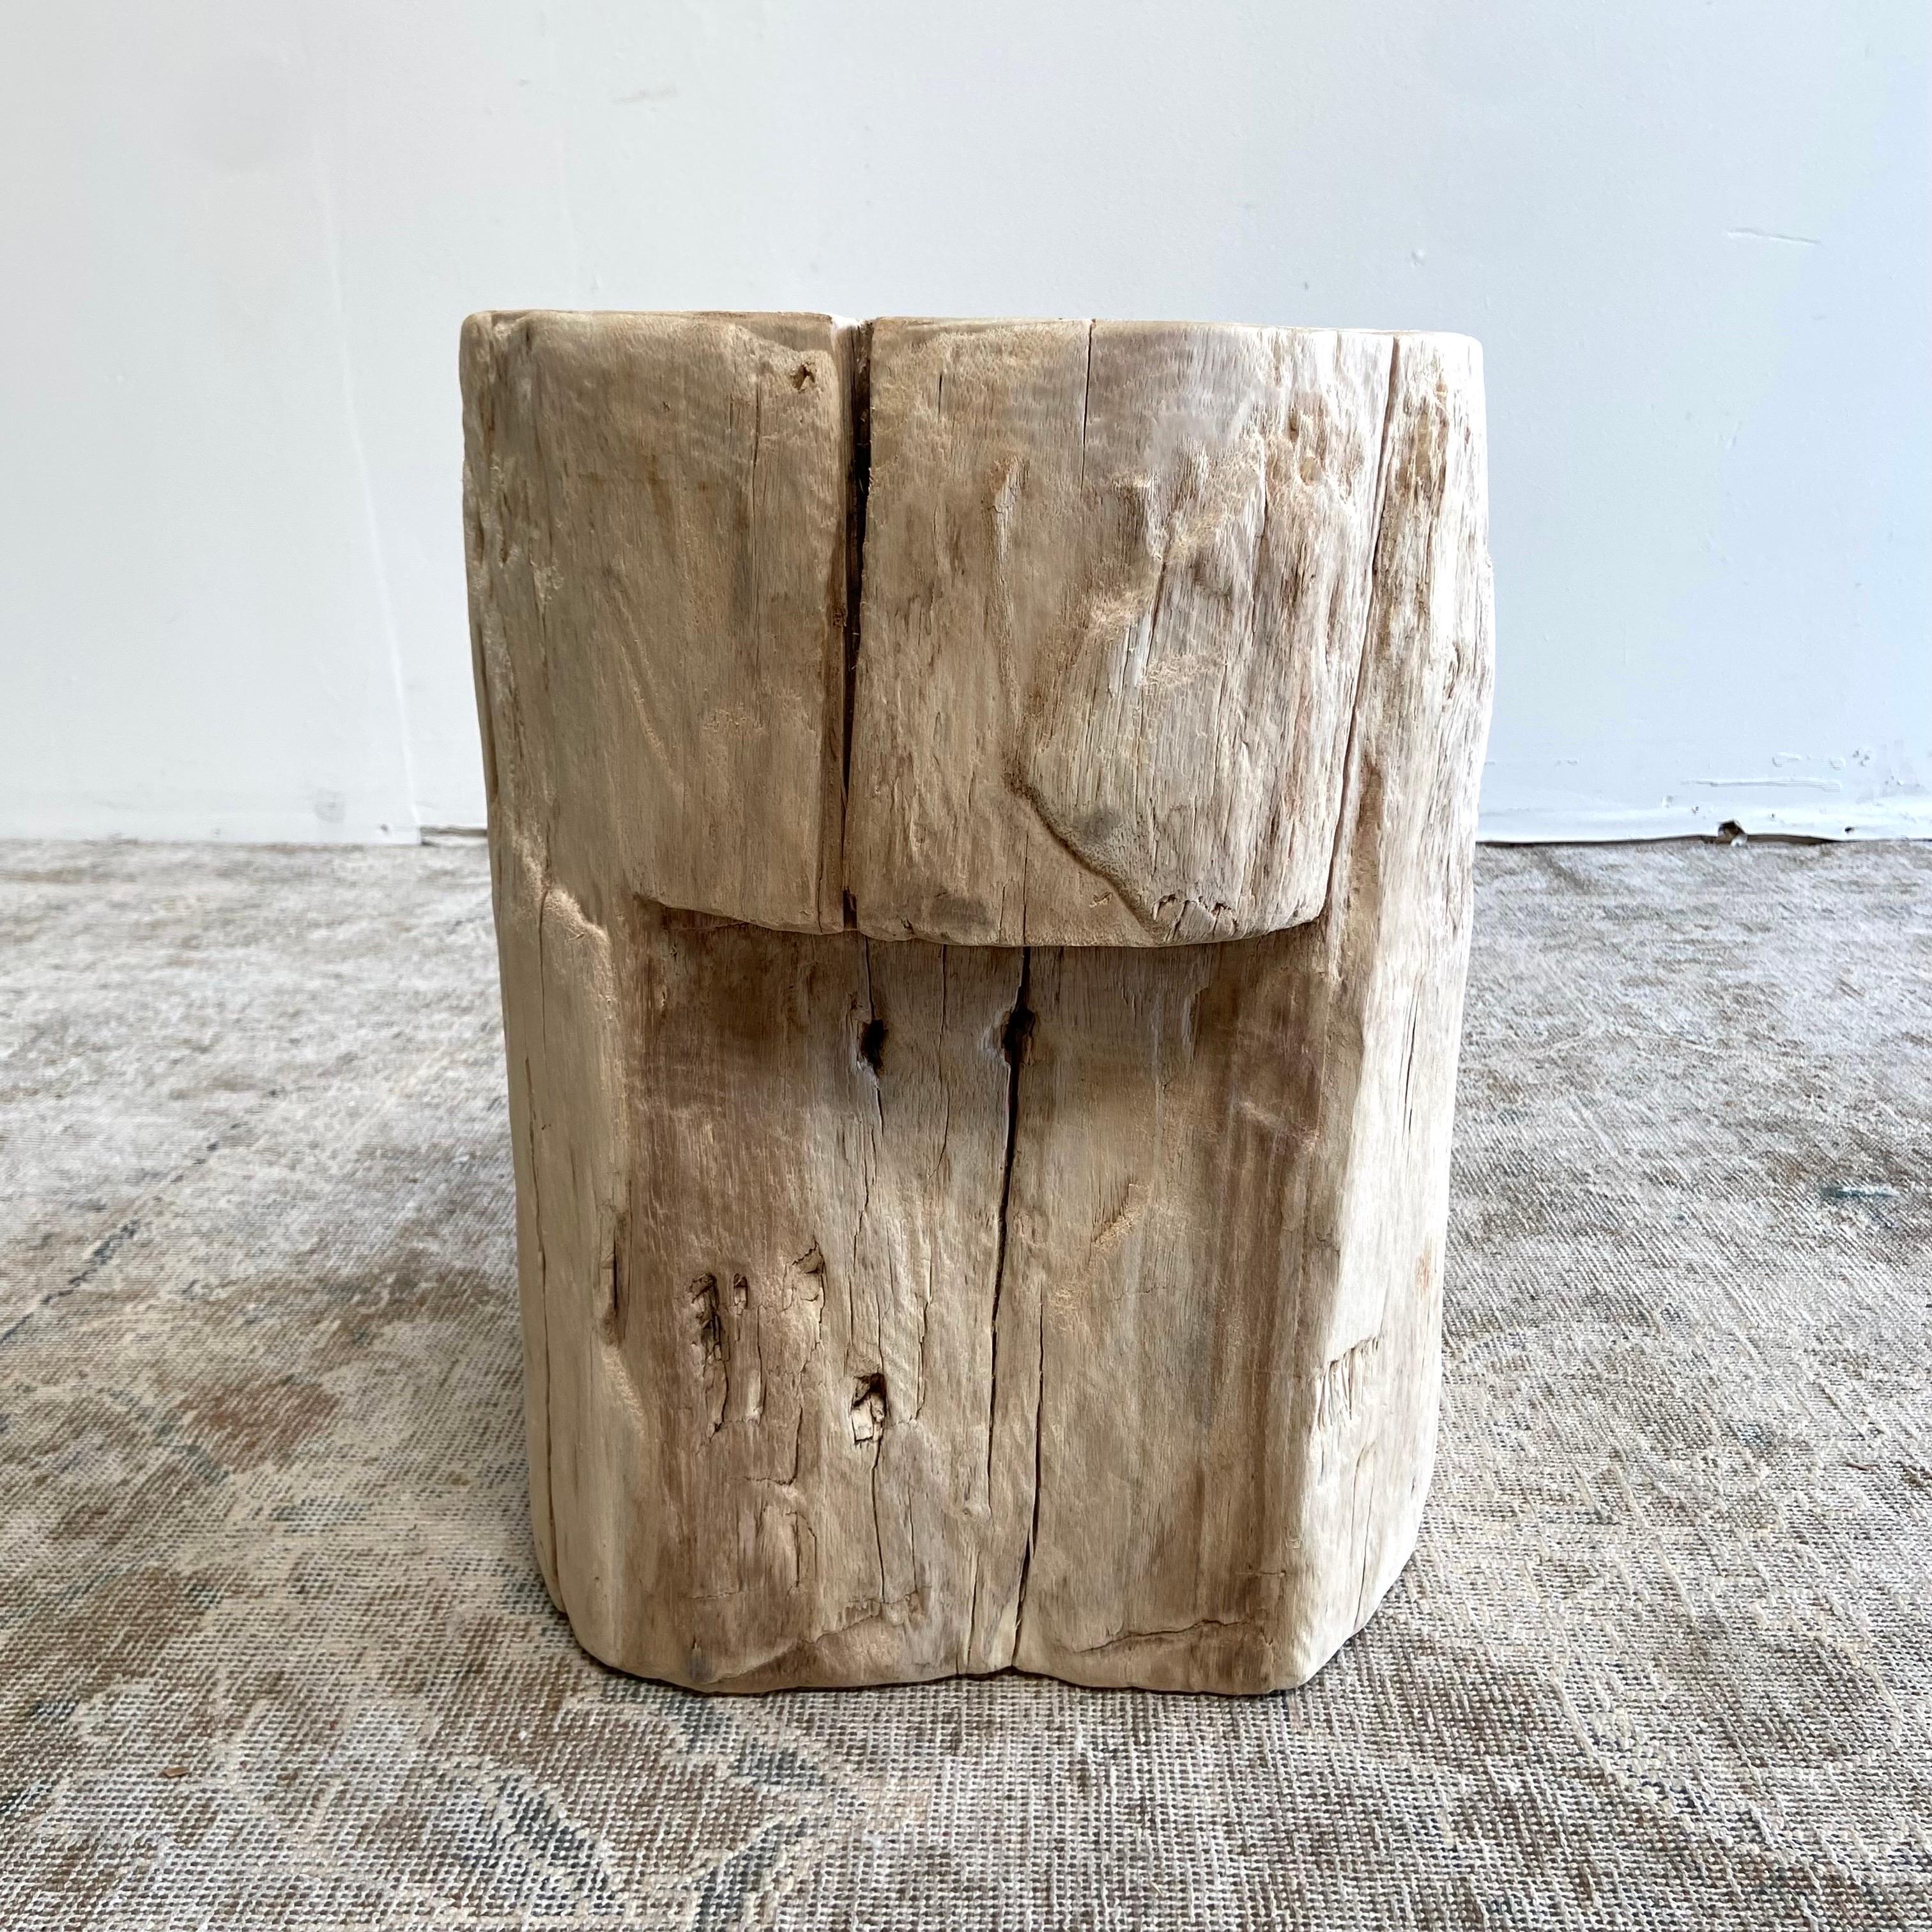 Natural Wood Stump Side Table or Stool In Good Condition For Sale In Brea, CA